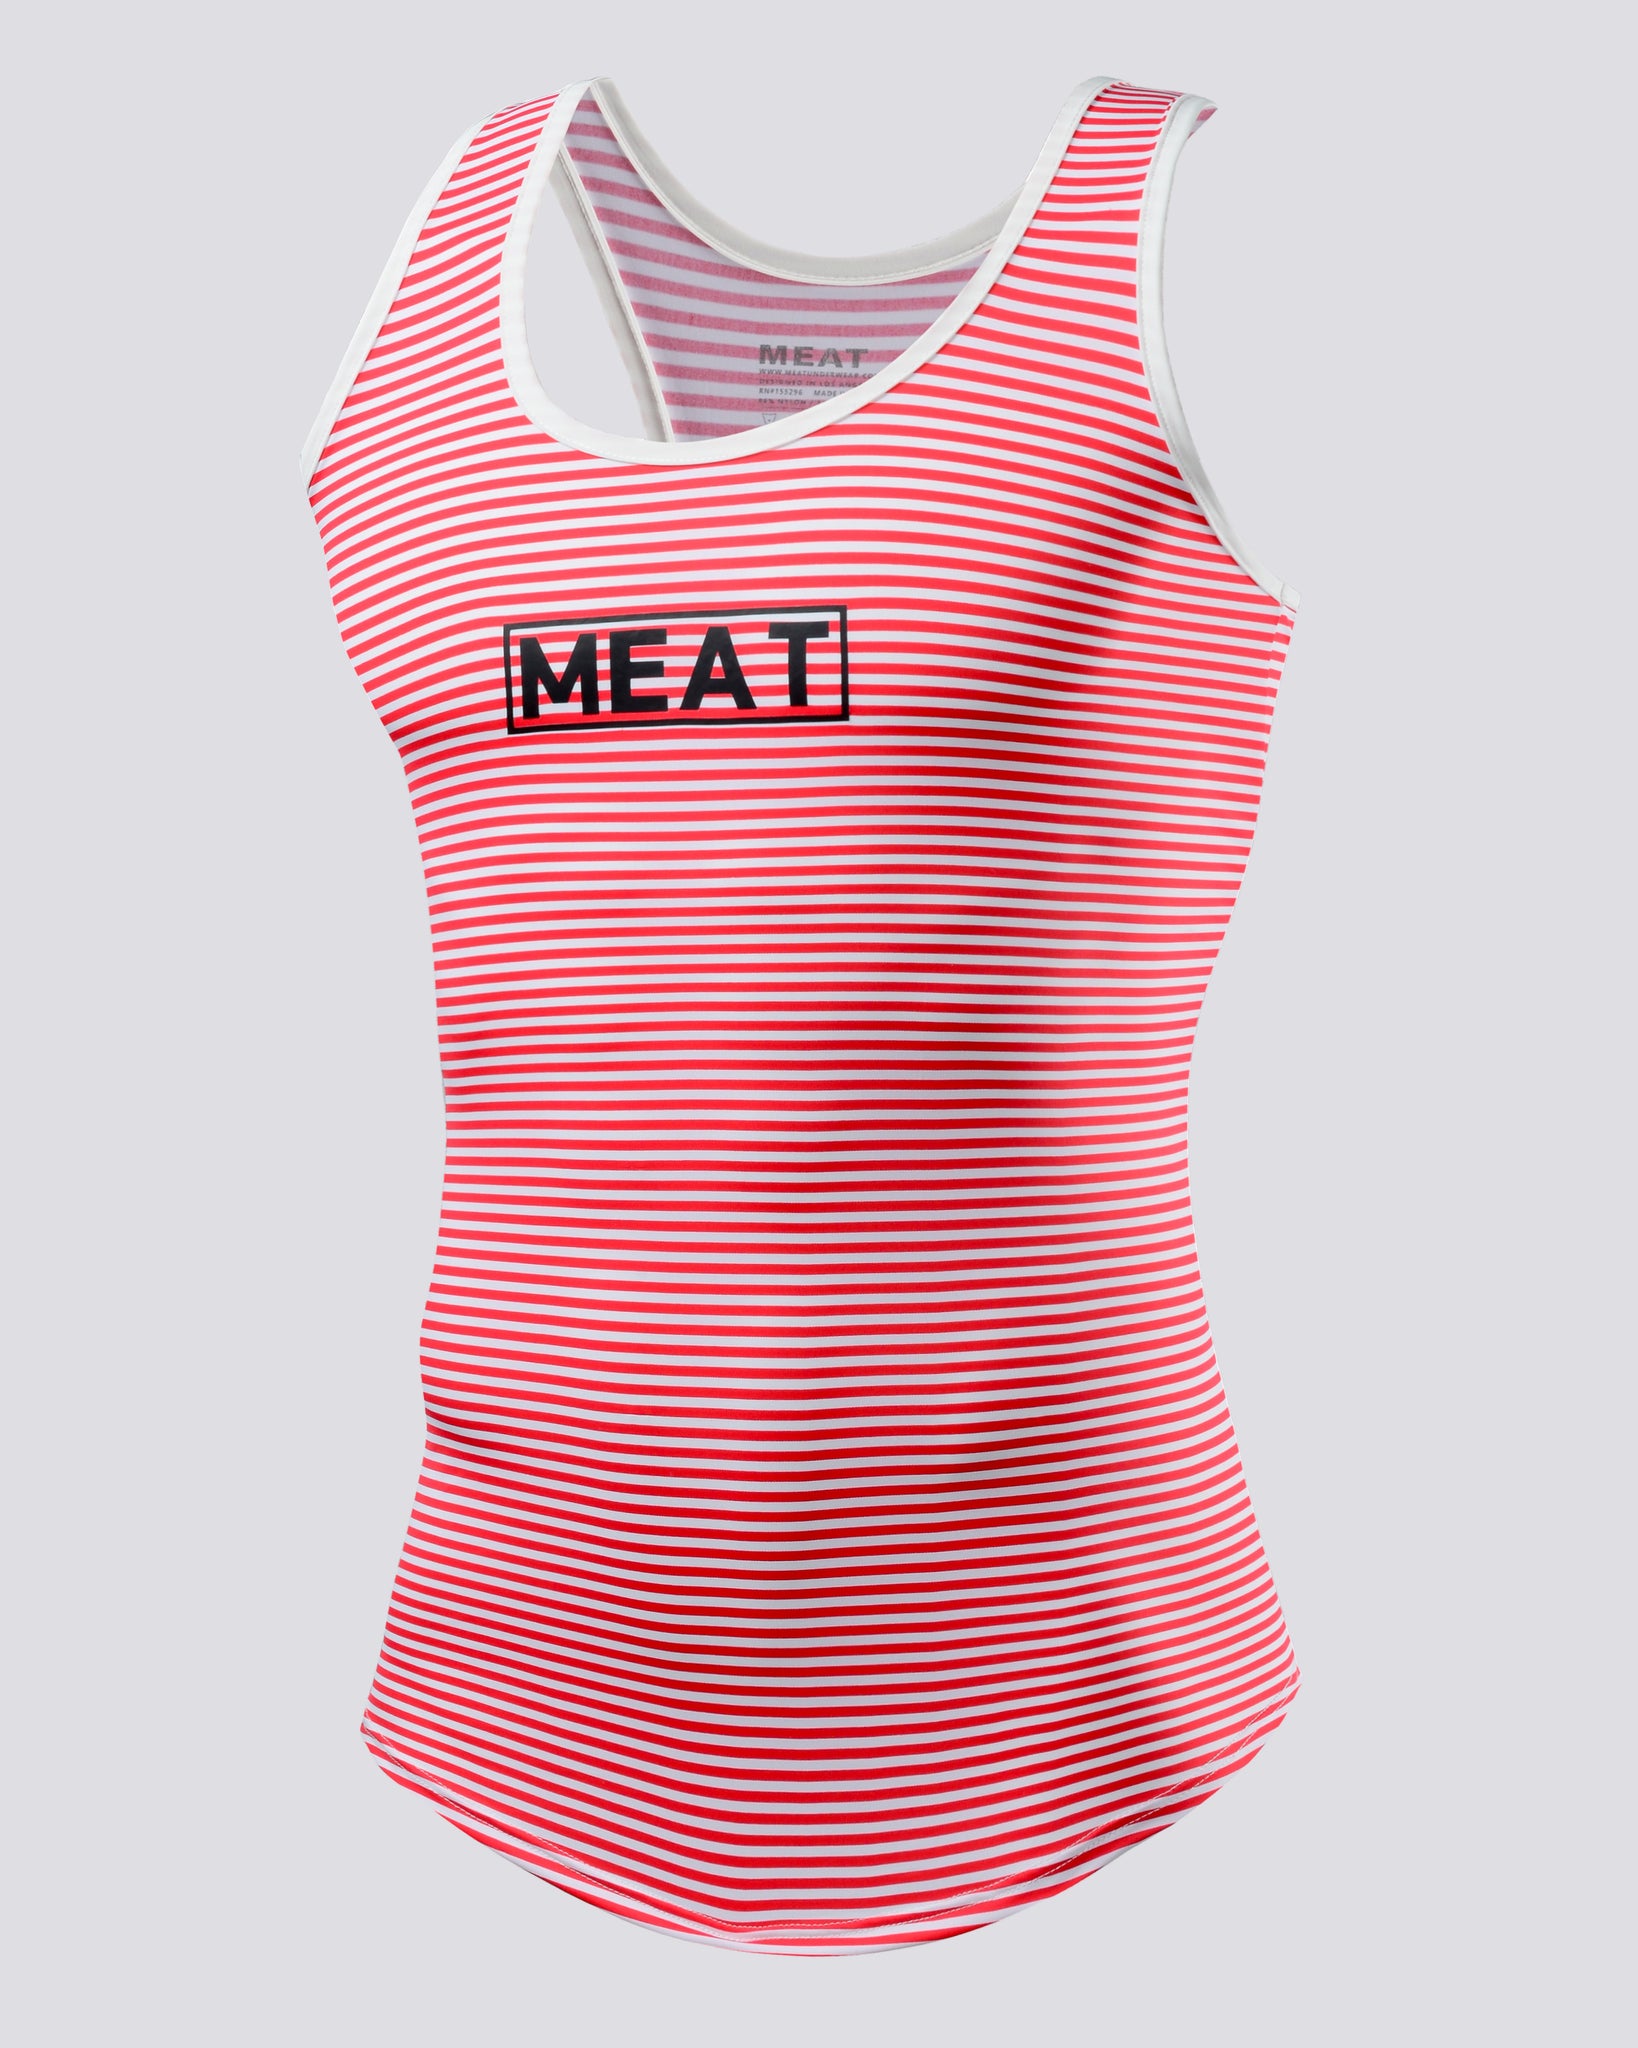 CLASSIC TRAINING STRINGER - STRIPED RED